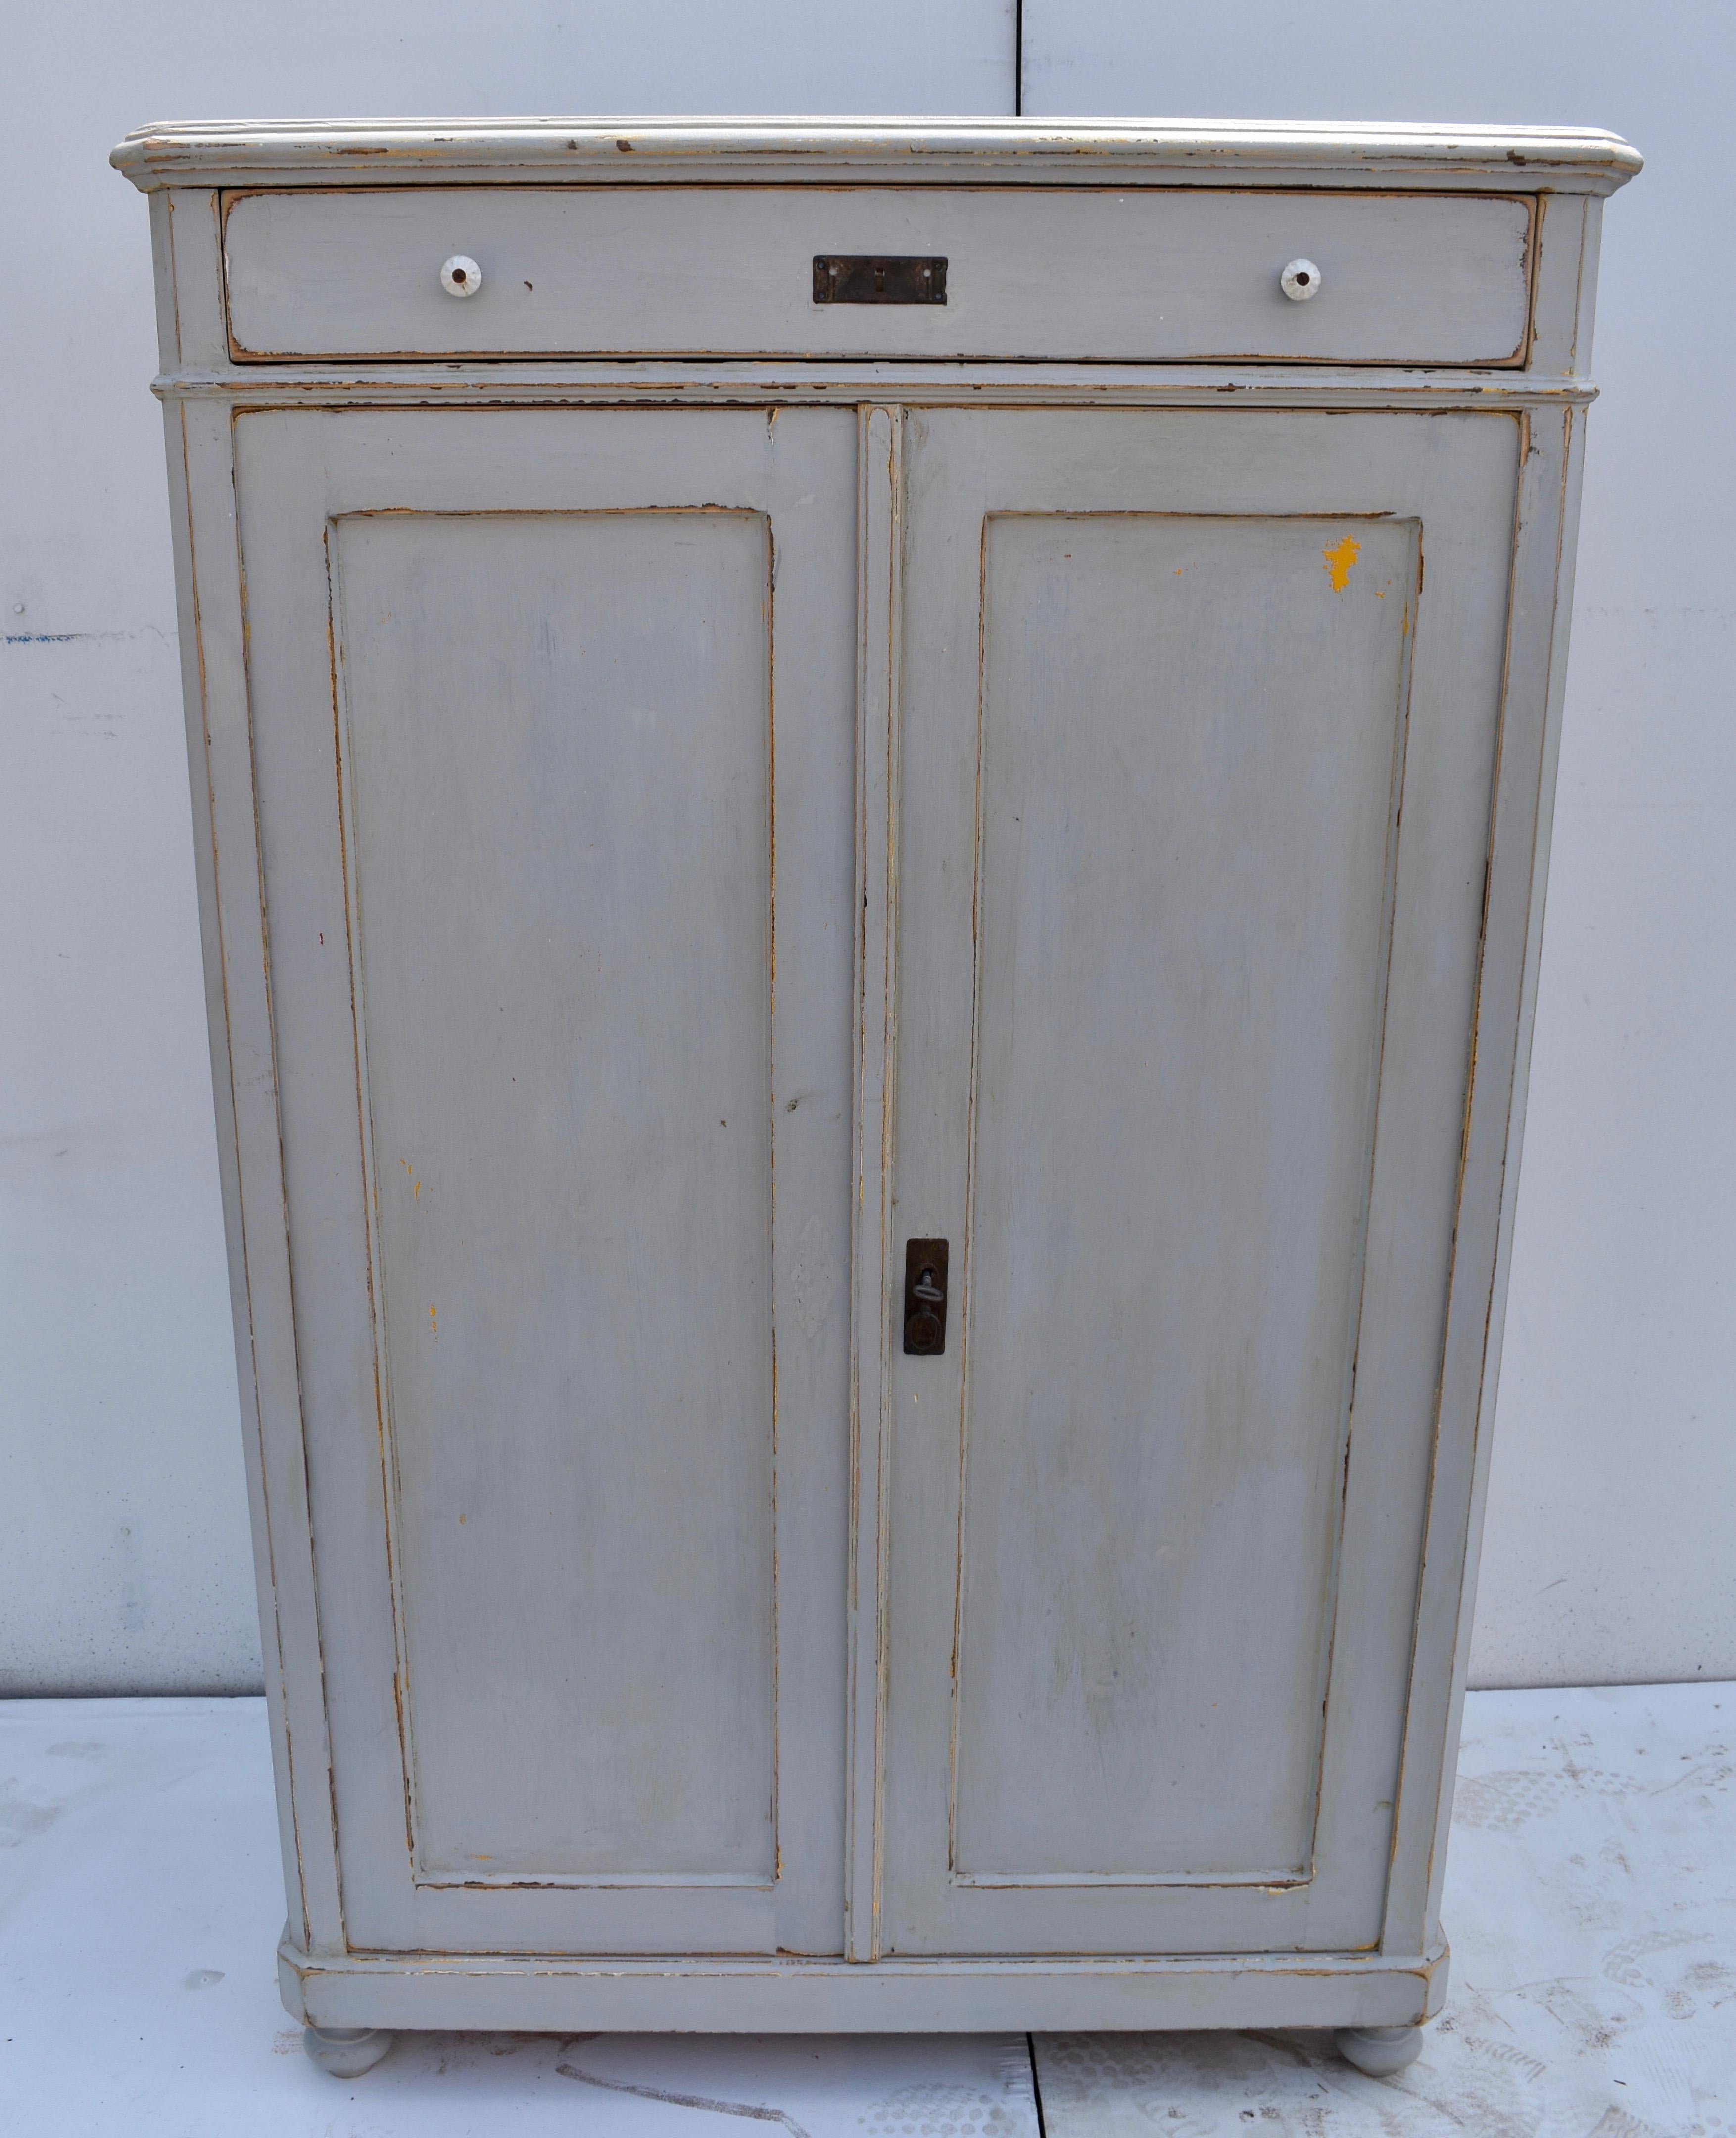 This Hungarian pine linen cabinet has a lovely form and is configured like a “vertigo”, or vertical cabinet, with the drawer placed above the two paneled doors. The top and the front corners of the case are chamfered in the French style. The